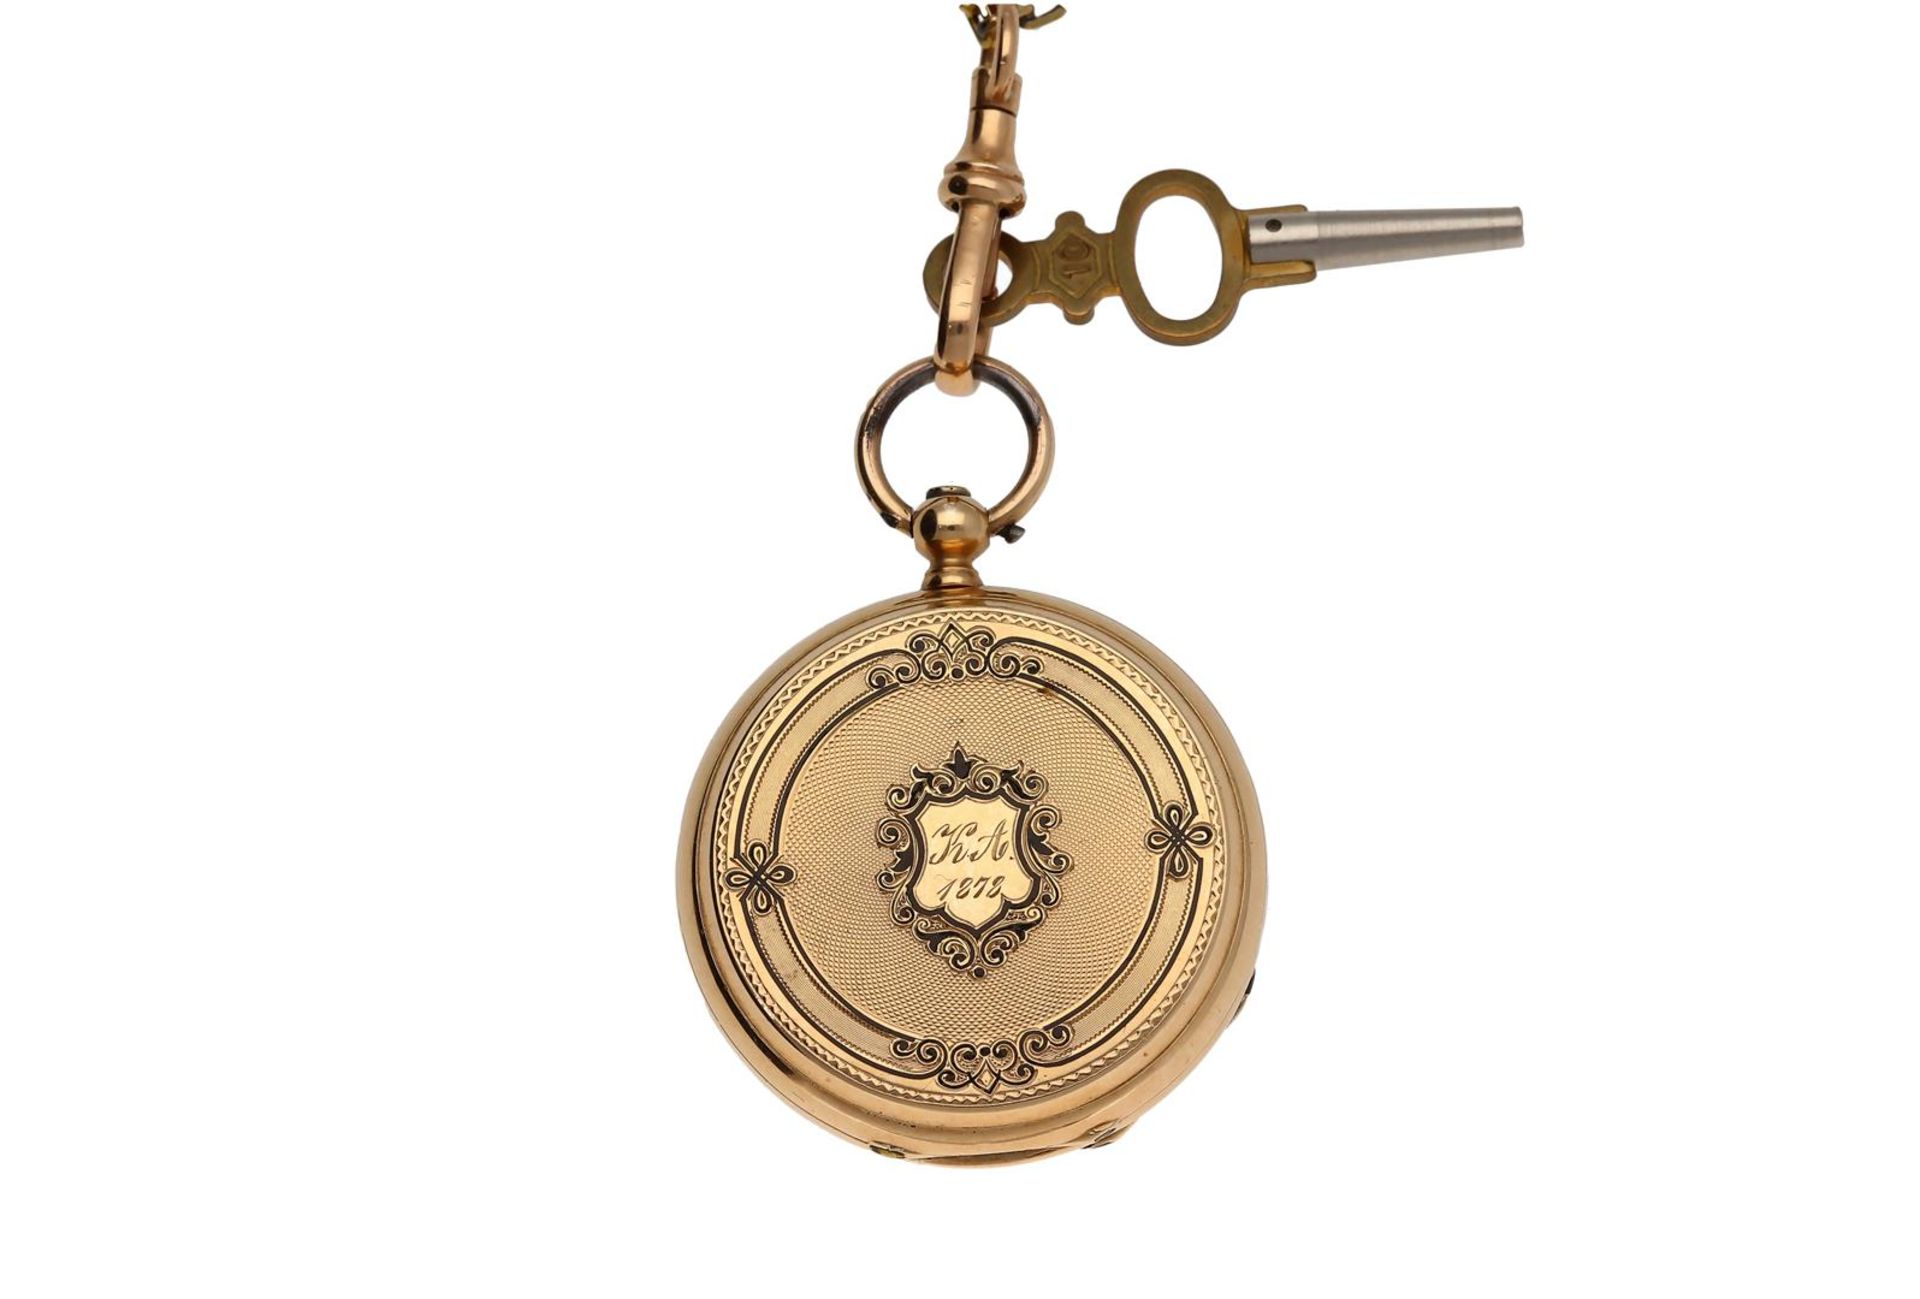 A 14-kt gold ladies remontoir pocket watch on a gold chain, Peret et fils, the engraved case with mo - Image 7 of 9